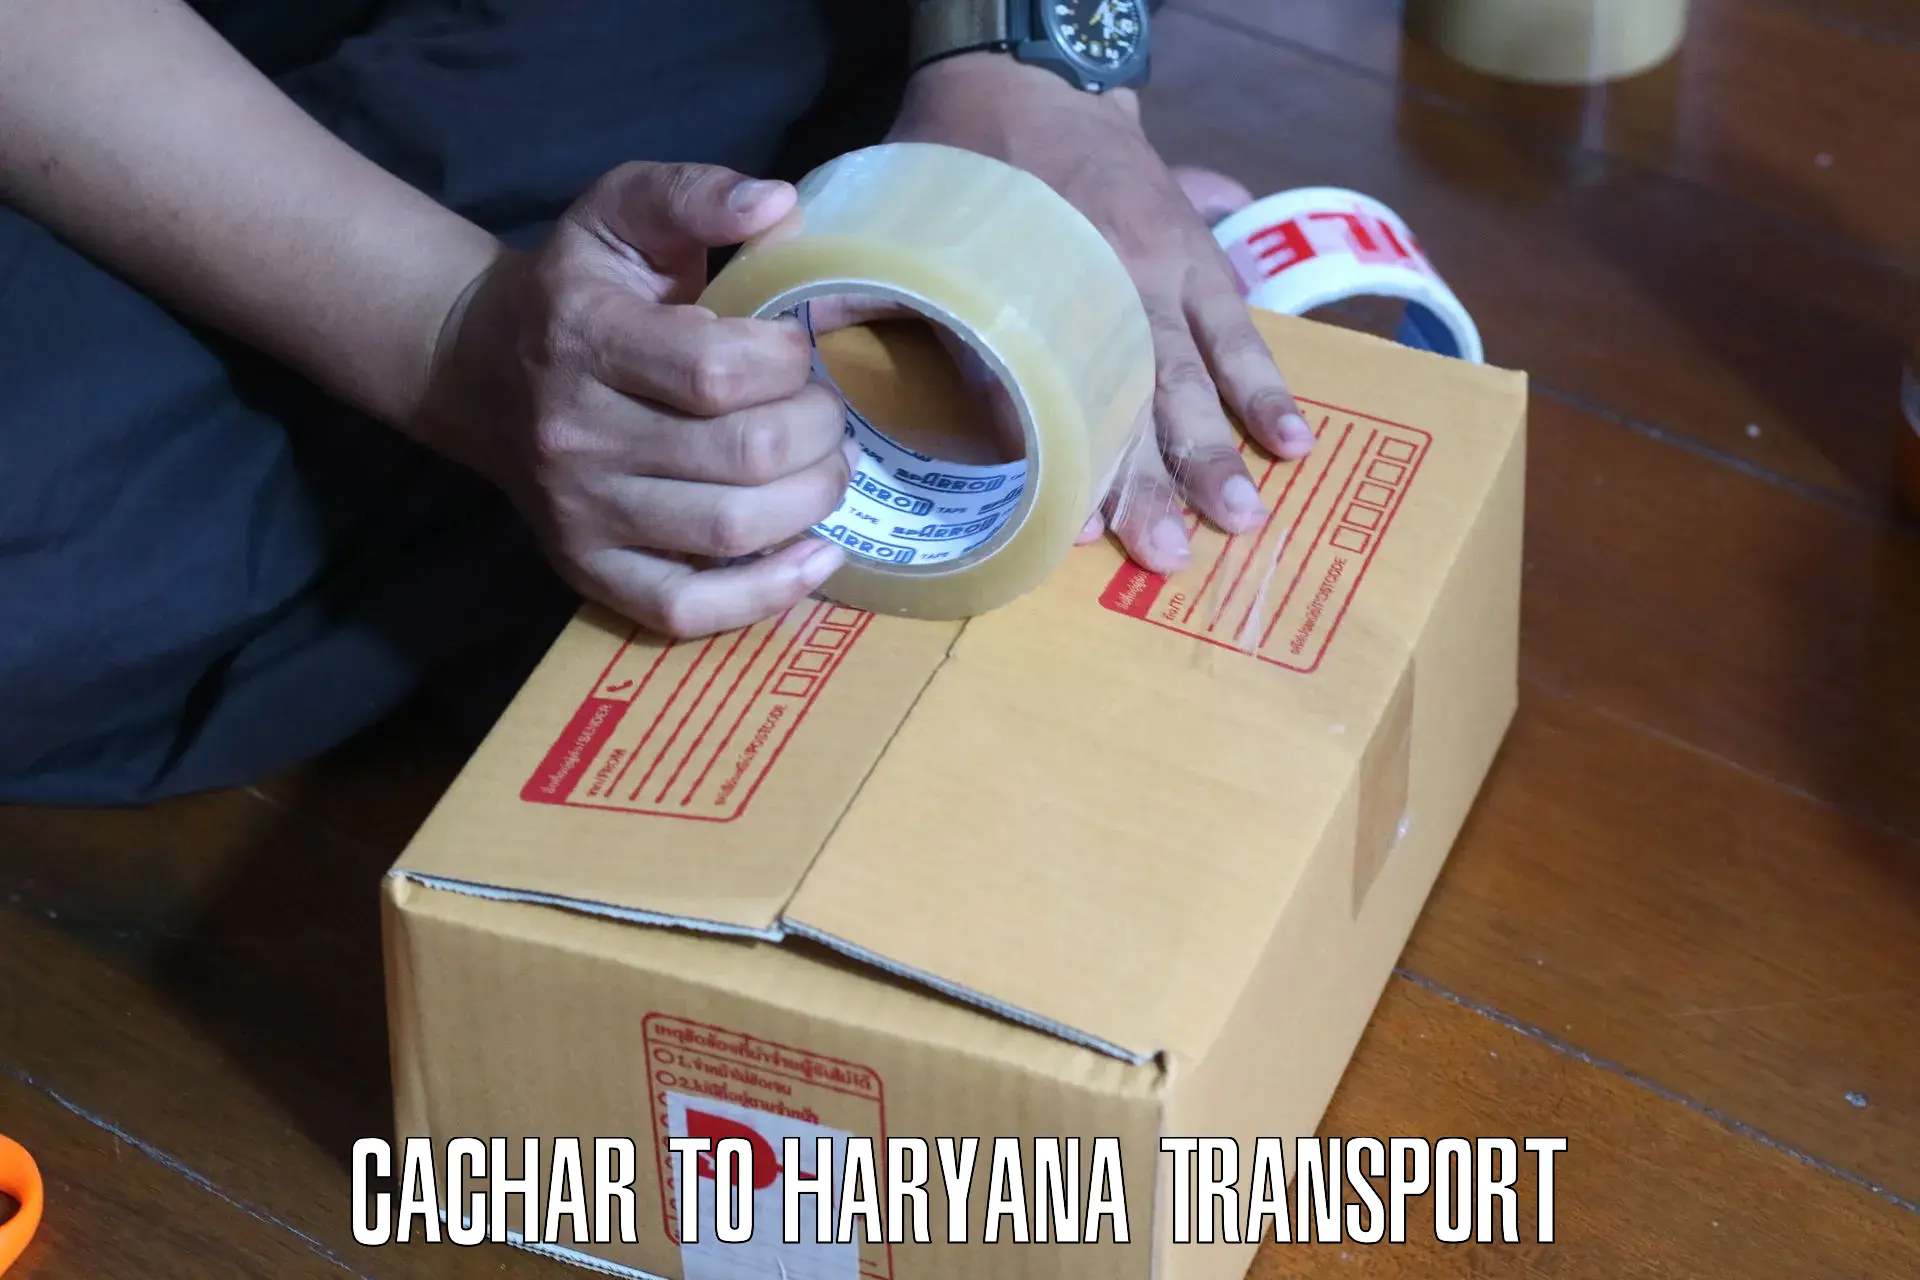 Furniture transport service Cachar to Sonipat